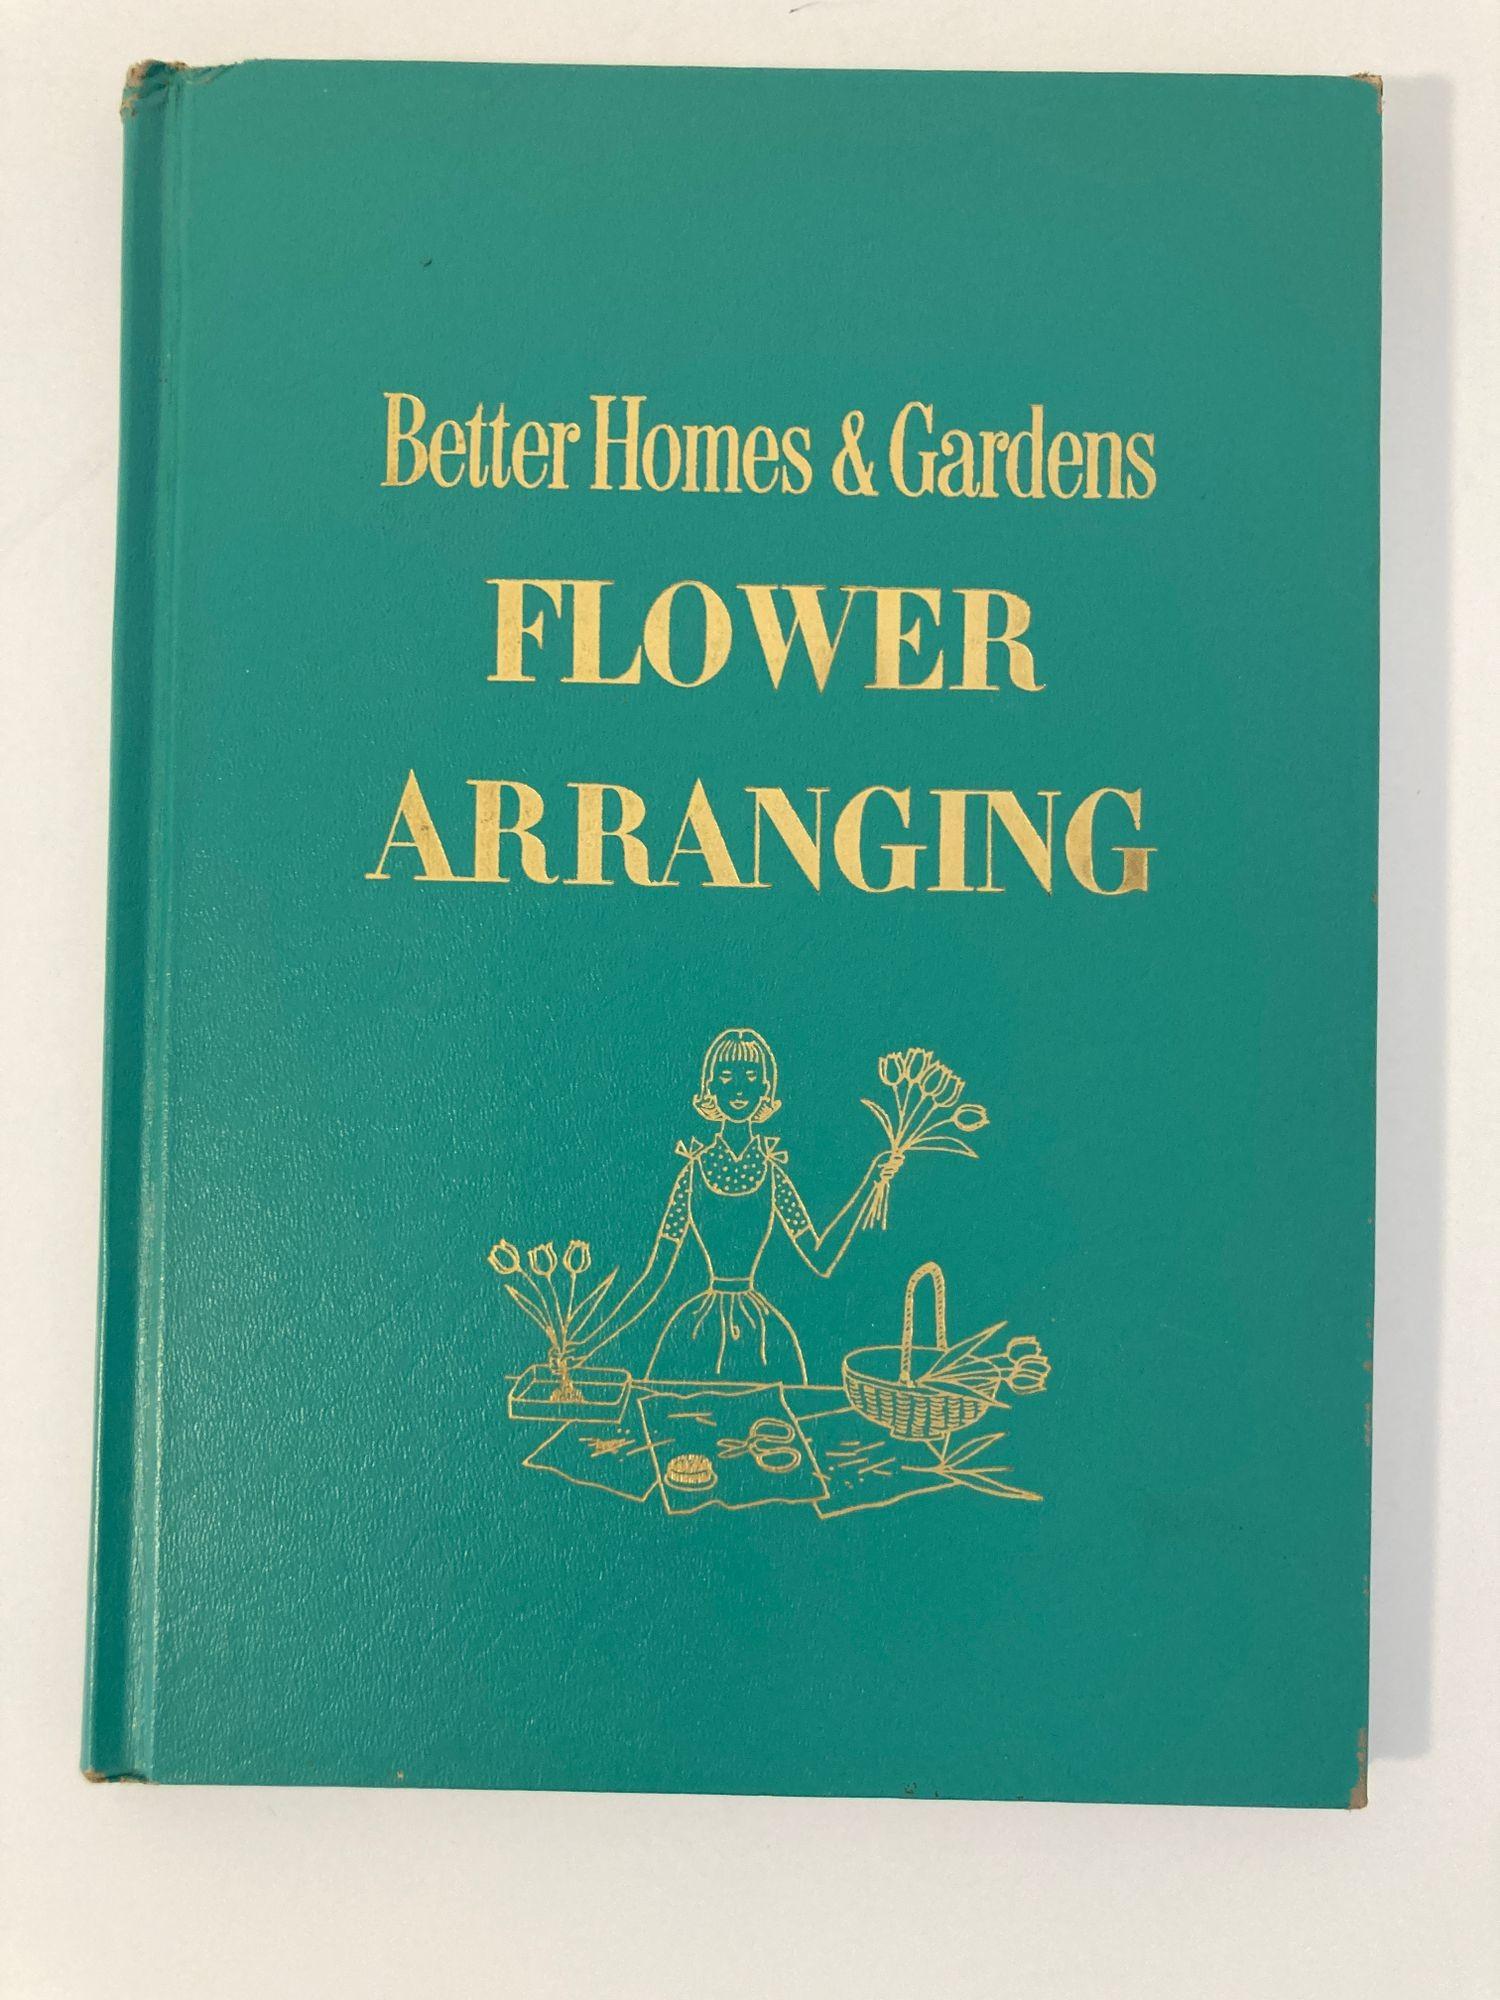 Vintage hardcover book, Better Homes & Gardens Flower Arranging: For Every Day and Special Occasions Library Binding – January 1, 1957
Hardcover book by Better Homes and Gardens. Mid-Century Modern flowers hardcover book.
In the pages of this book